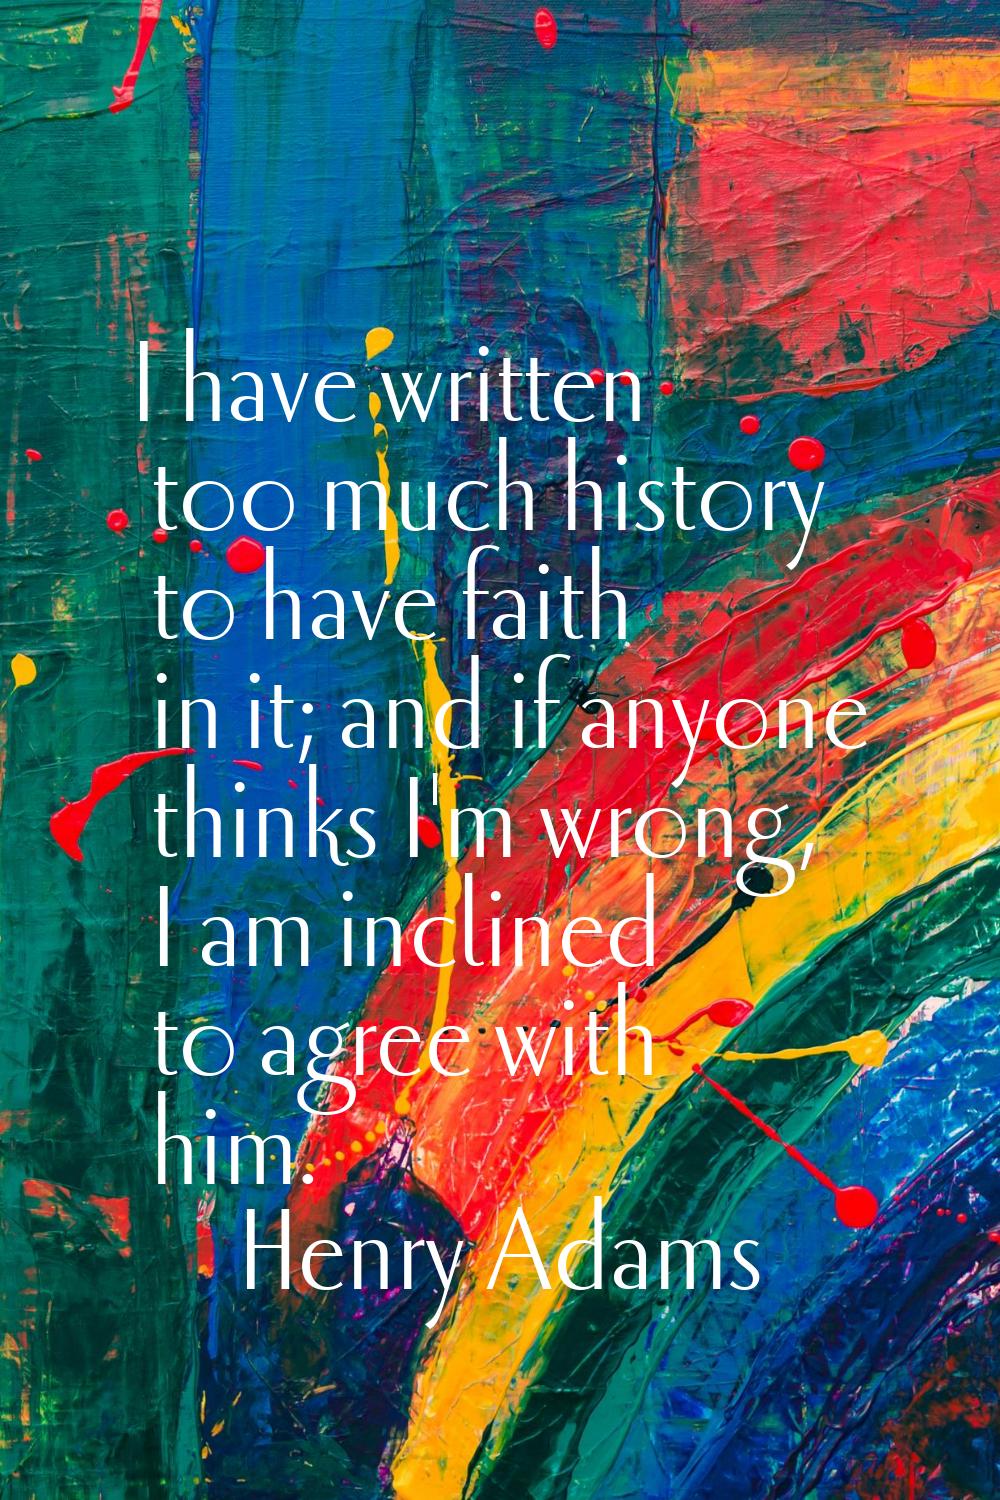 I have written too much history to have faith in it; and if anyone thinks I'm wrong, I am inclined 